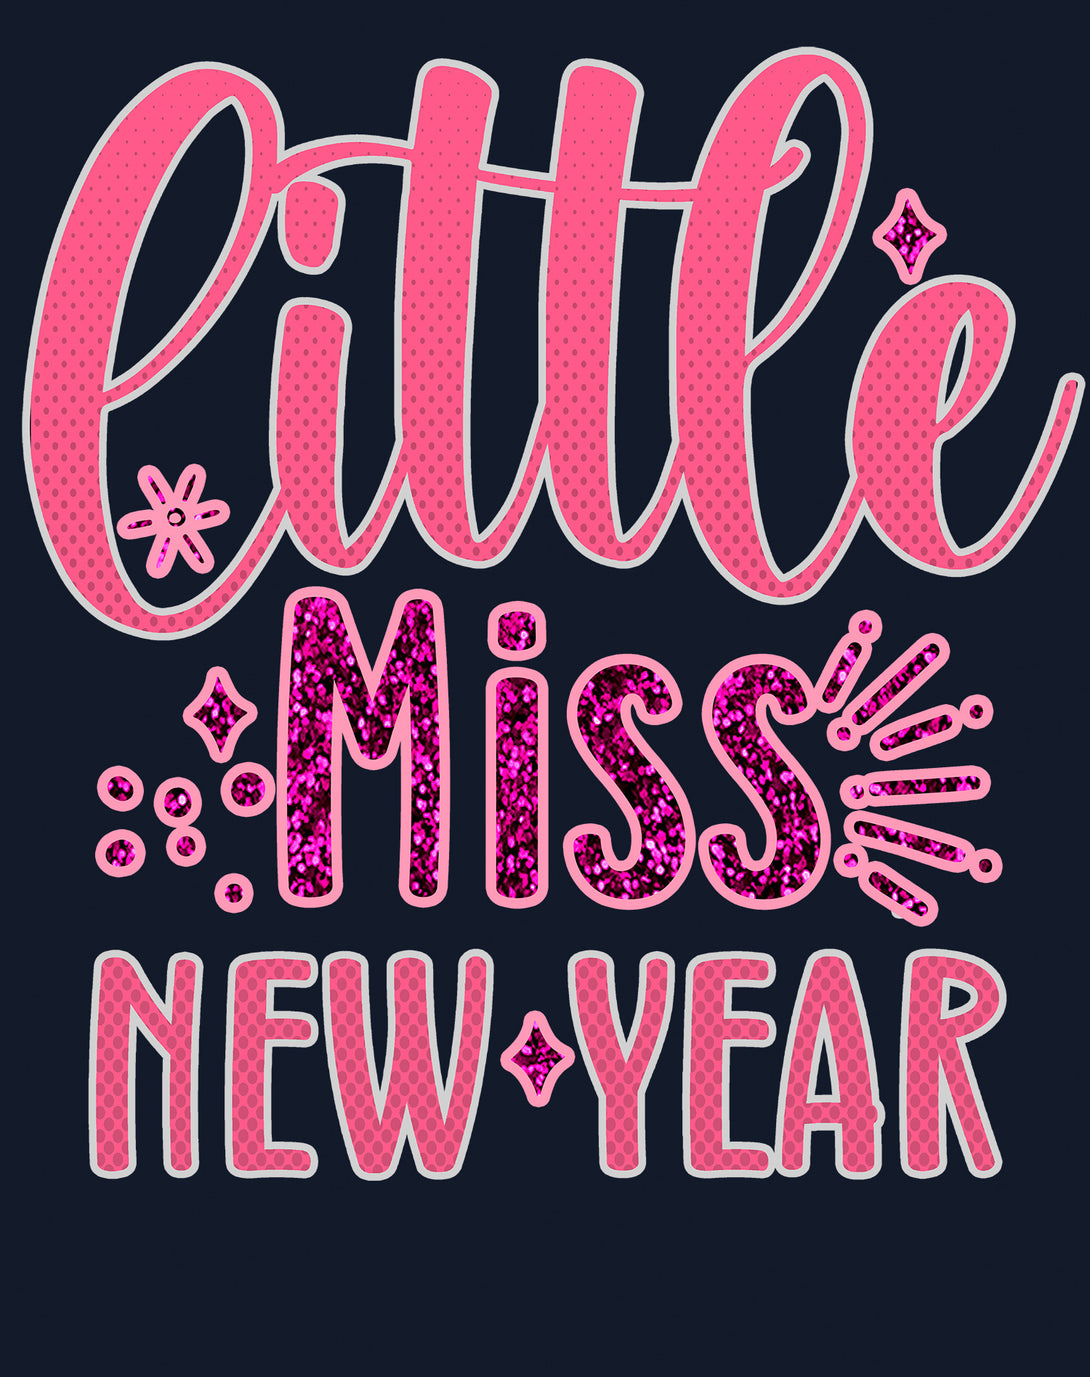 NYE Little Miss New Year Sparkle Bling Party Eve Celebration Men's T-Shirt Navy - Urban Species Design Close Up